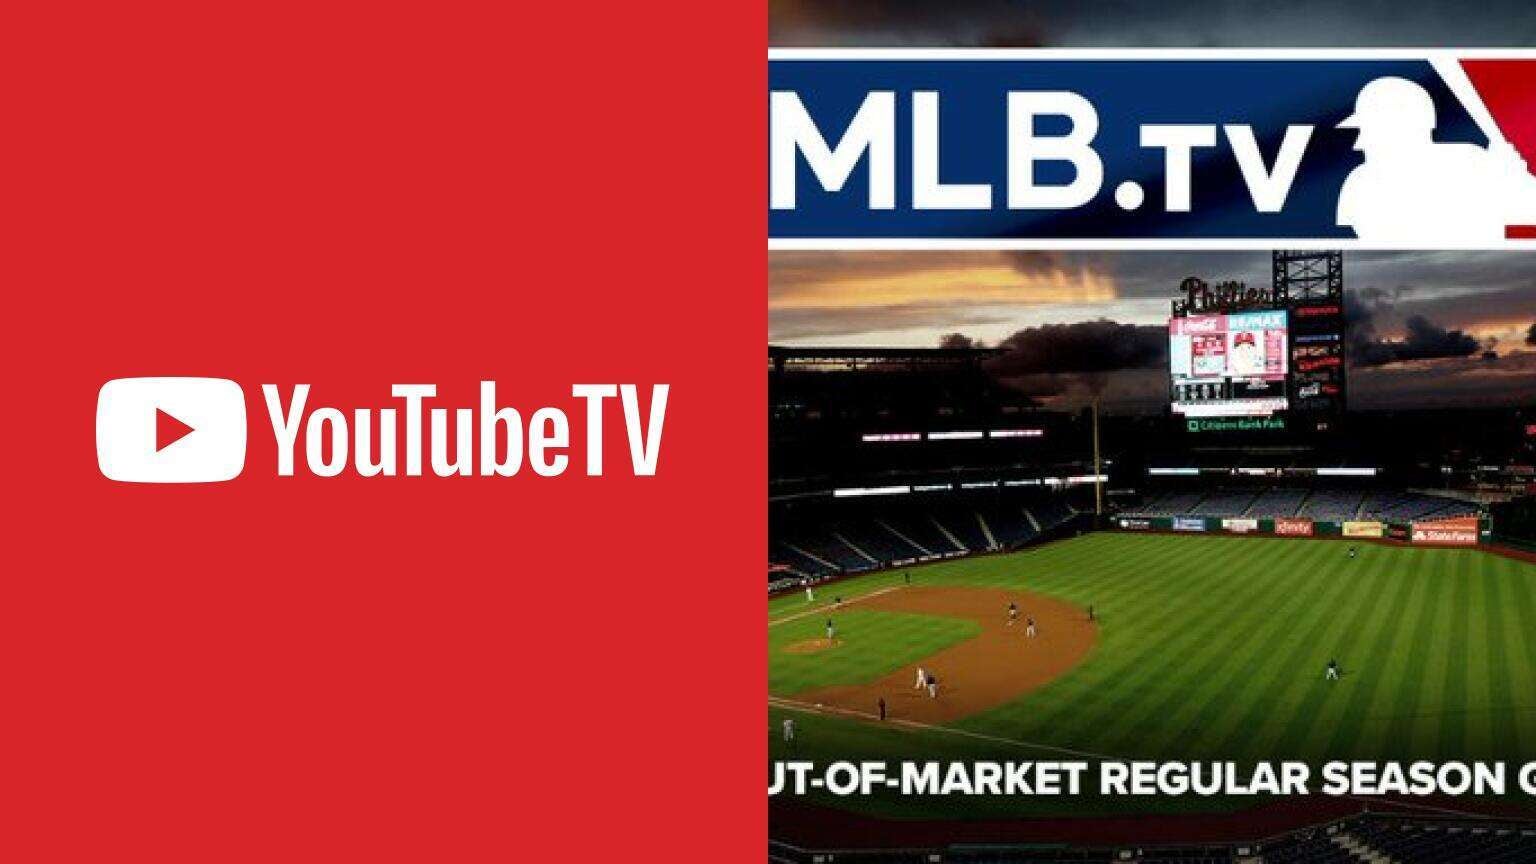 YouTube TV Adds Free Preview of MLB.TV Until March 31st The